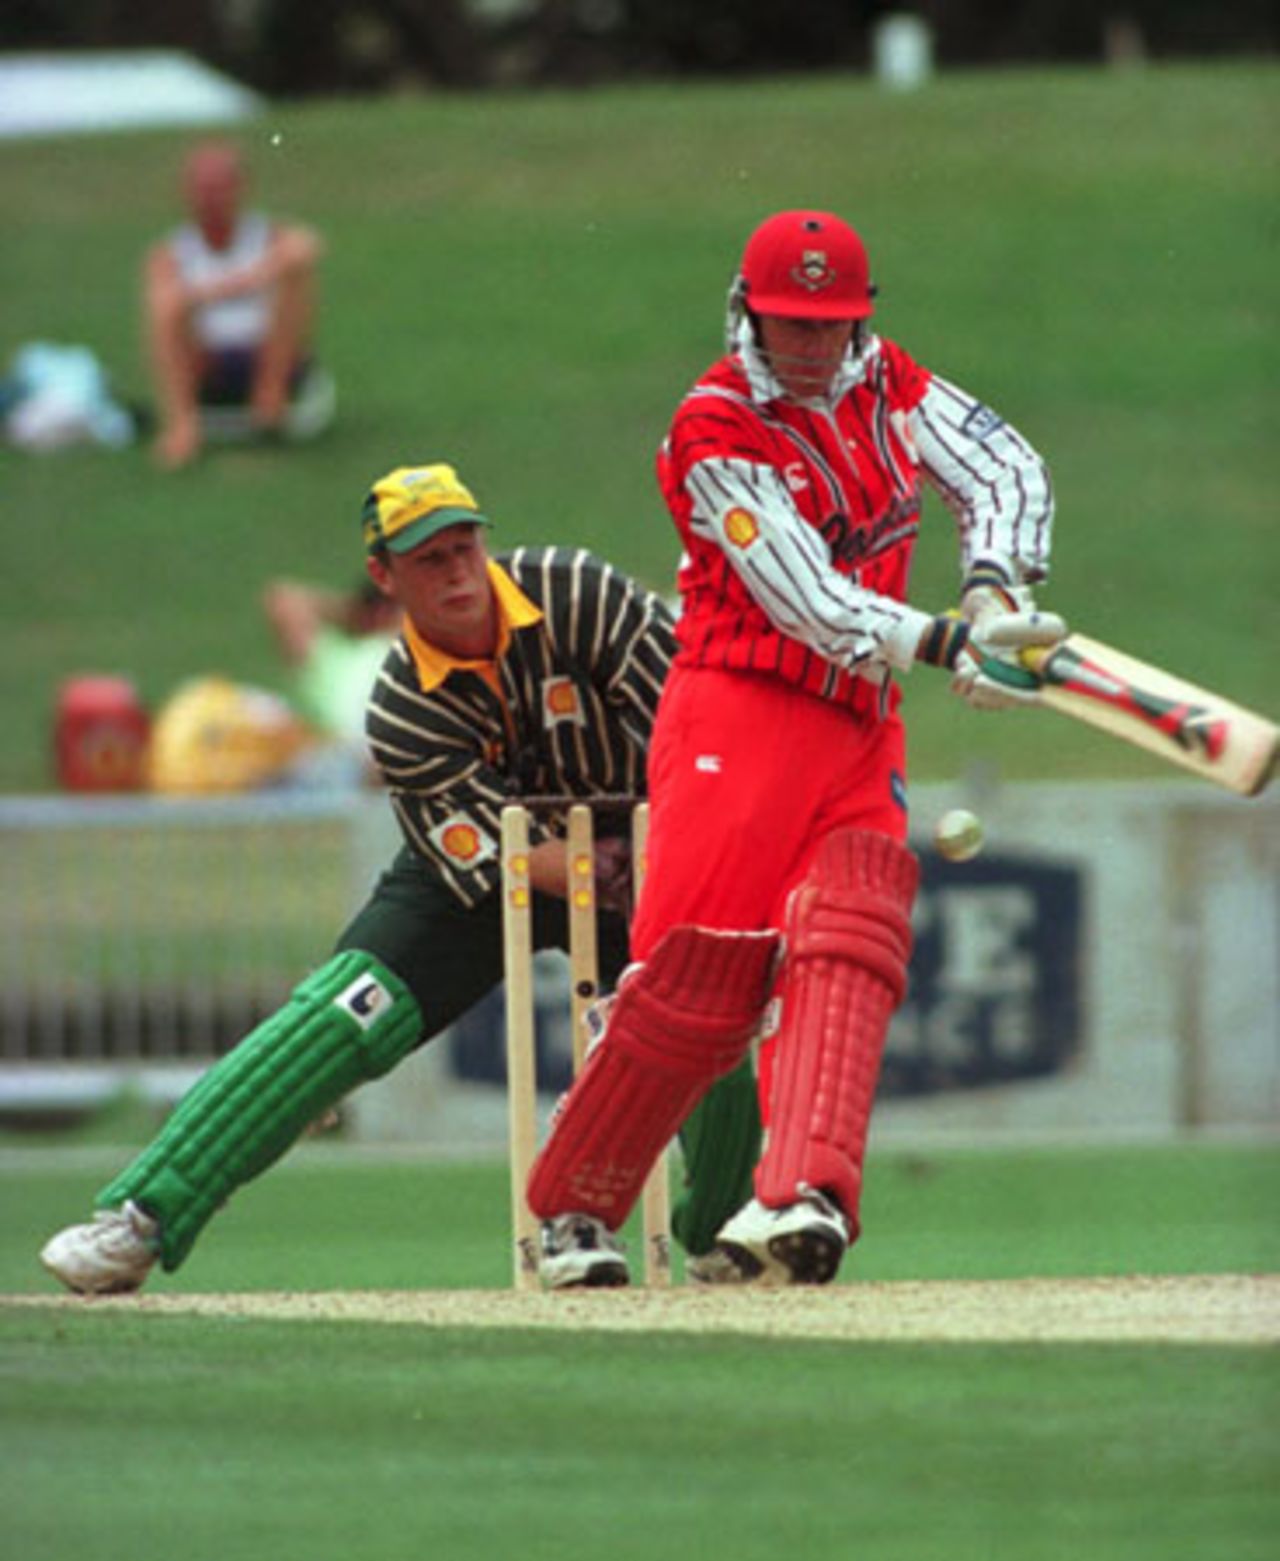 Canterbury batsman Gary Stead attempts to work a ball off his legs during his innings of 12 while Central Districts wicket-keeper Bevan Griggs looks on. 1st Shell Cup Final: Central Districts v Canterbury at McLean Park, Napier, 24 January 2001.